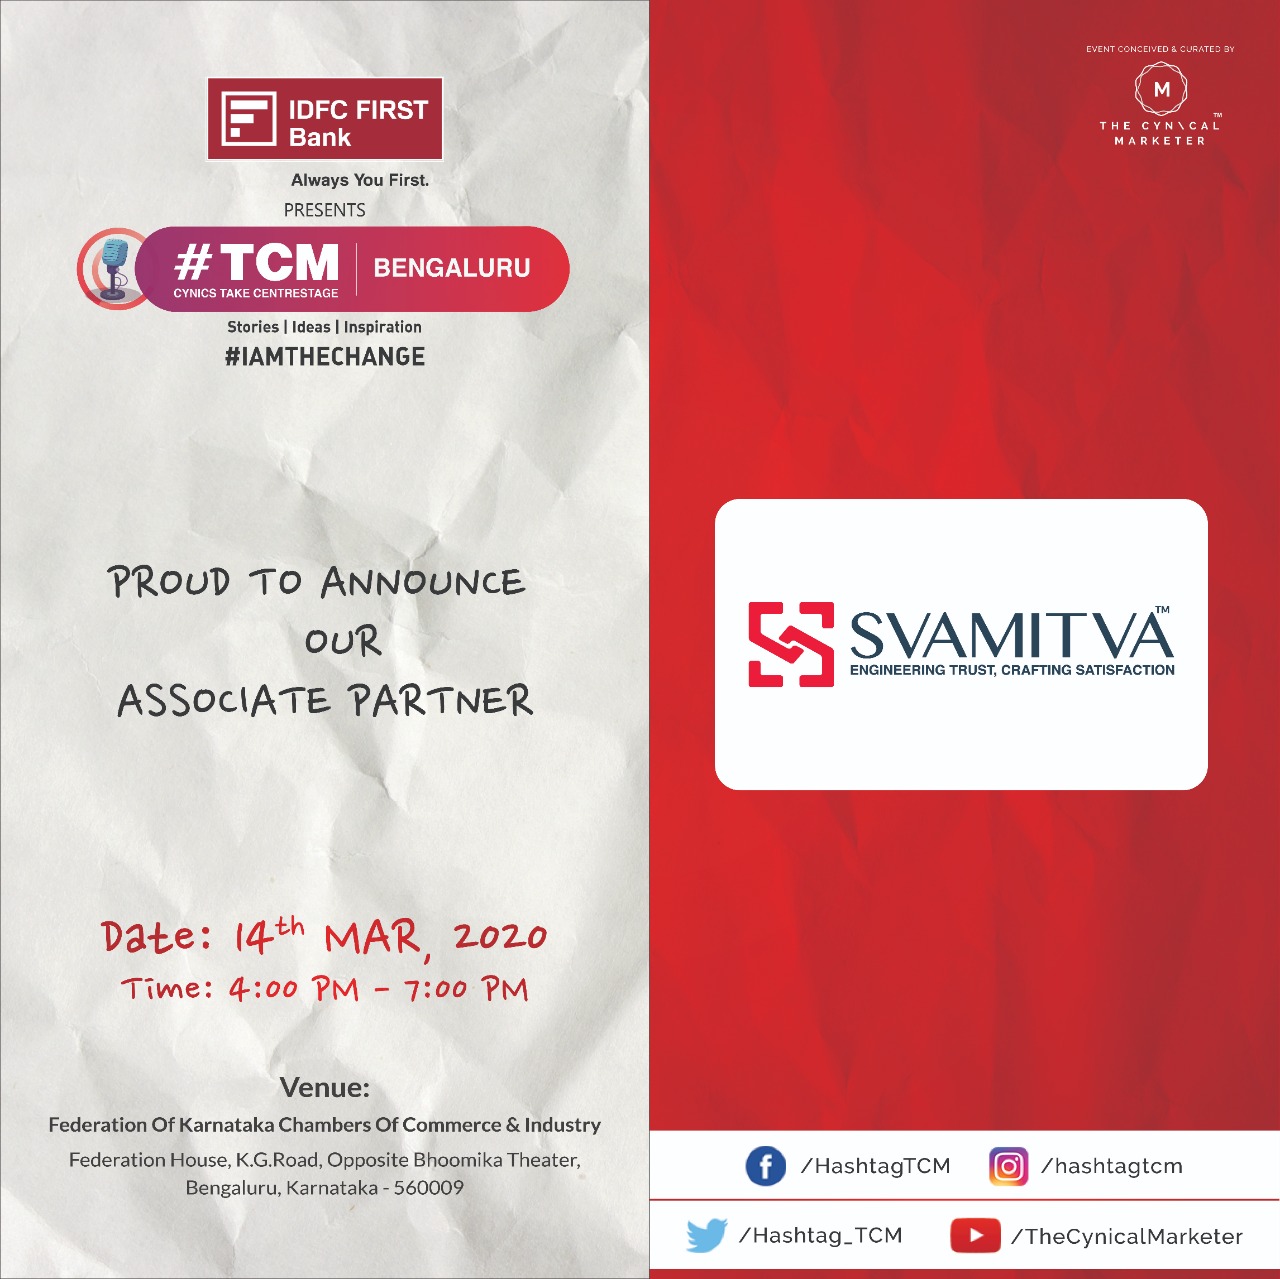 Svamitva Sponsers "#TCM Bengaluru" an event by the cynical marketer